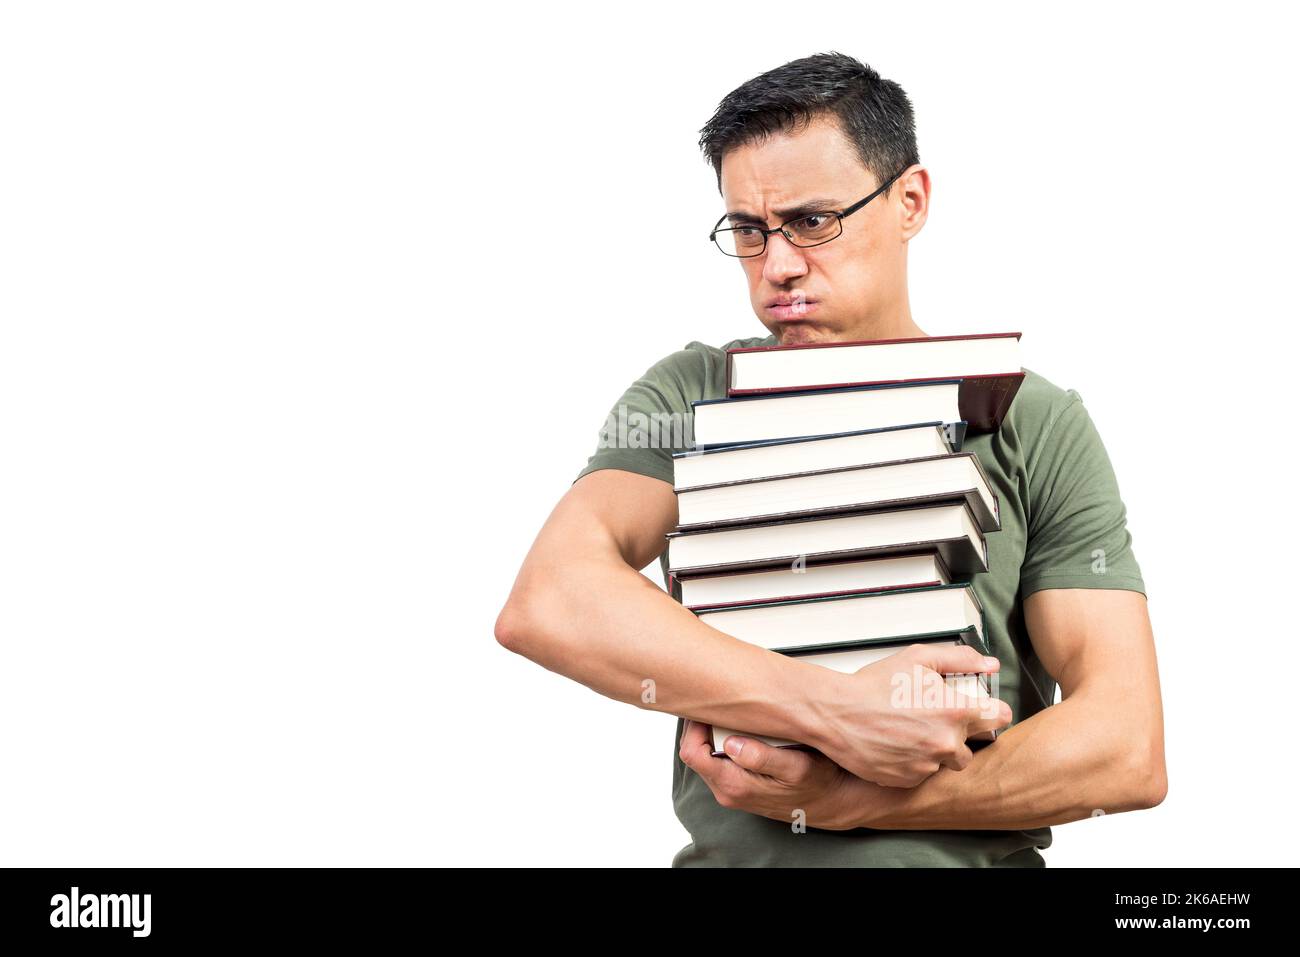 Tired male student carrying stack of books Stock Photo